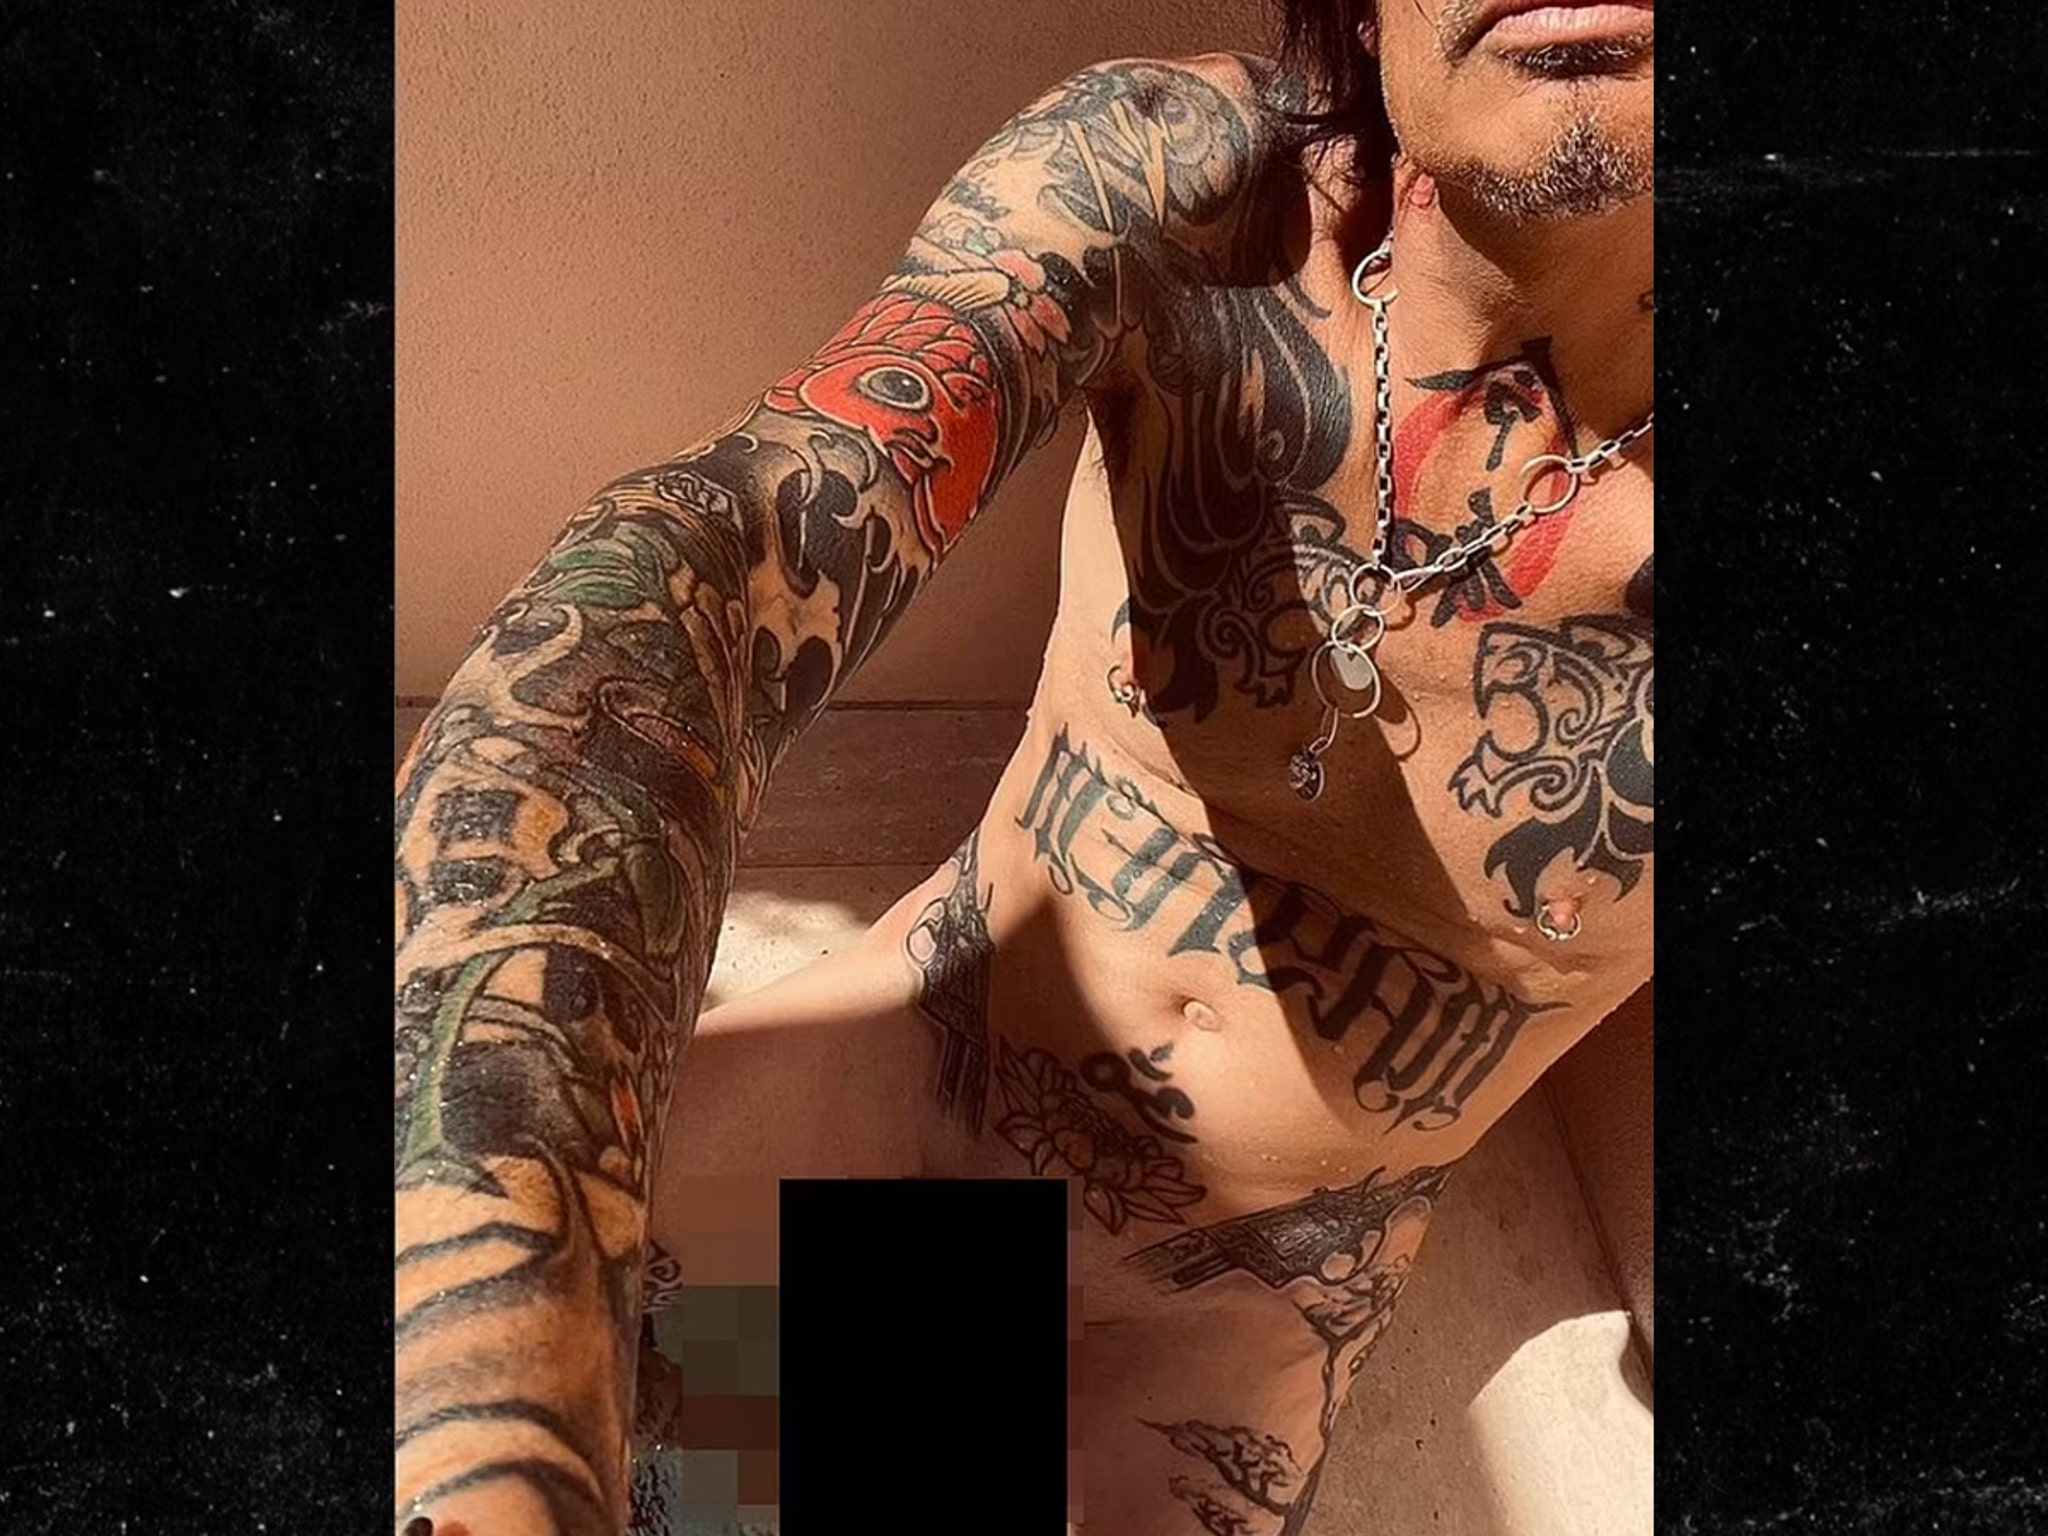 Tommy Lee Post Full Frontal Nude Pic On Instagram, Fans Shocked